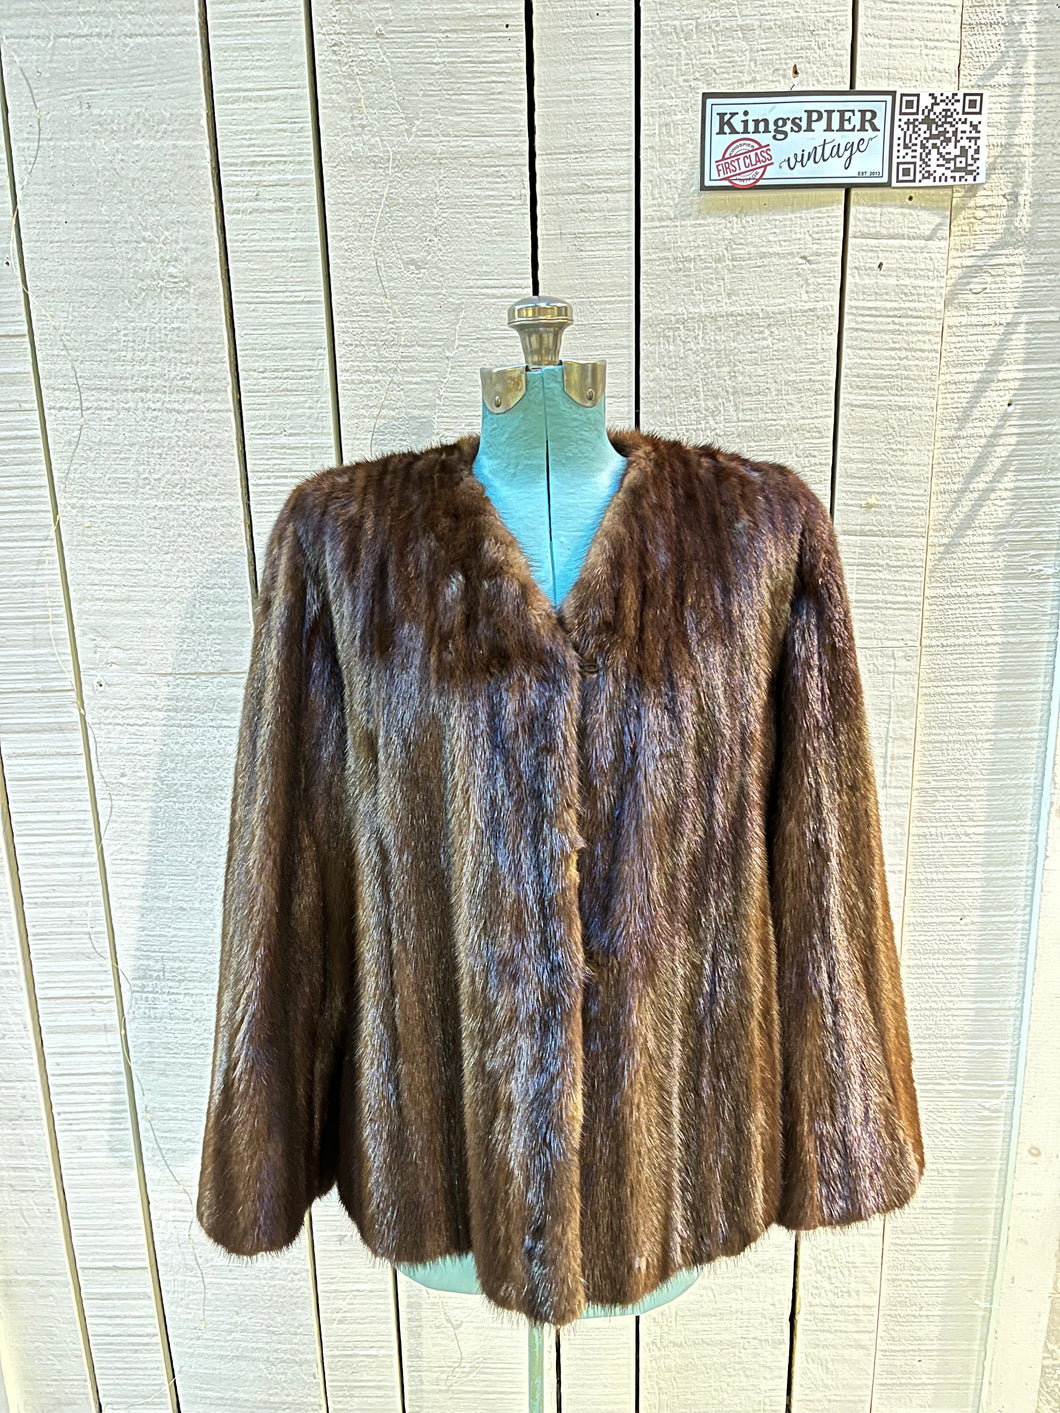 Vintage Gunter Jackal New York fur jacket with hook and eye closures, two front pockets and a “J.C.D” monogram on the inside lining.

Chest 40”